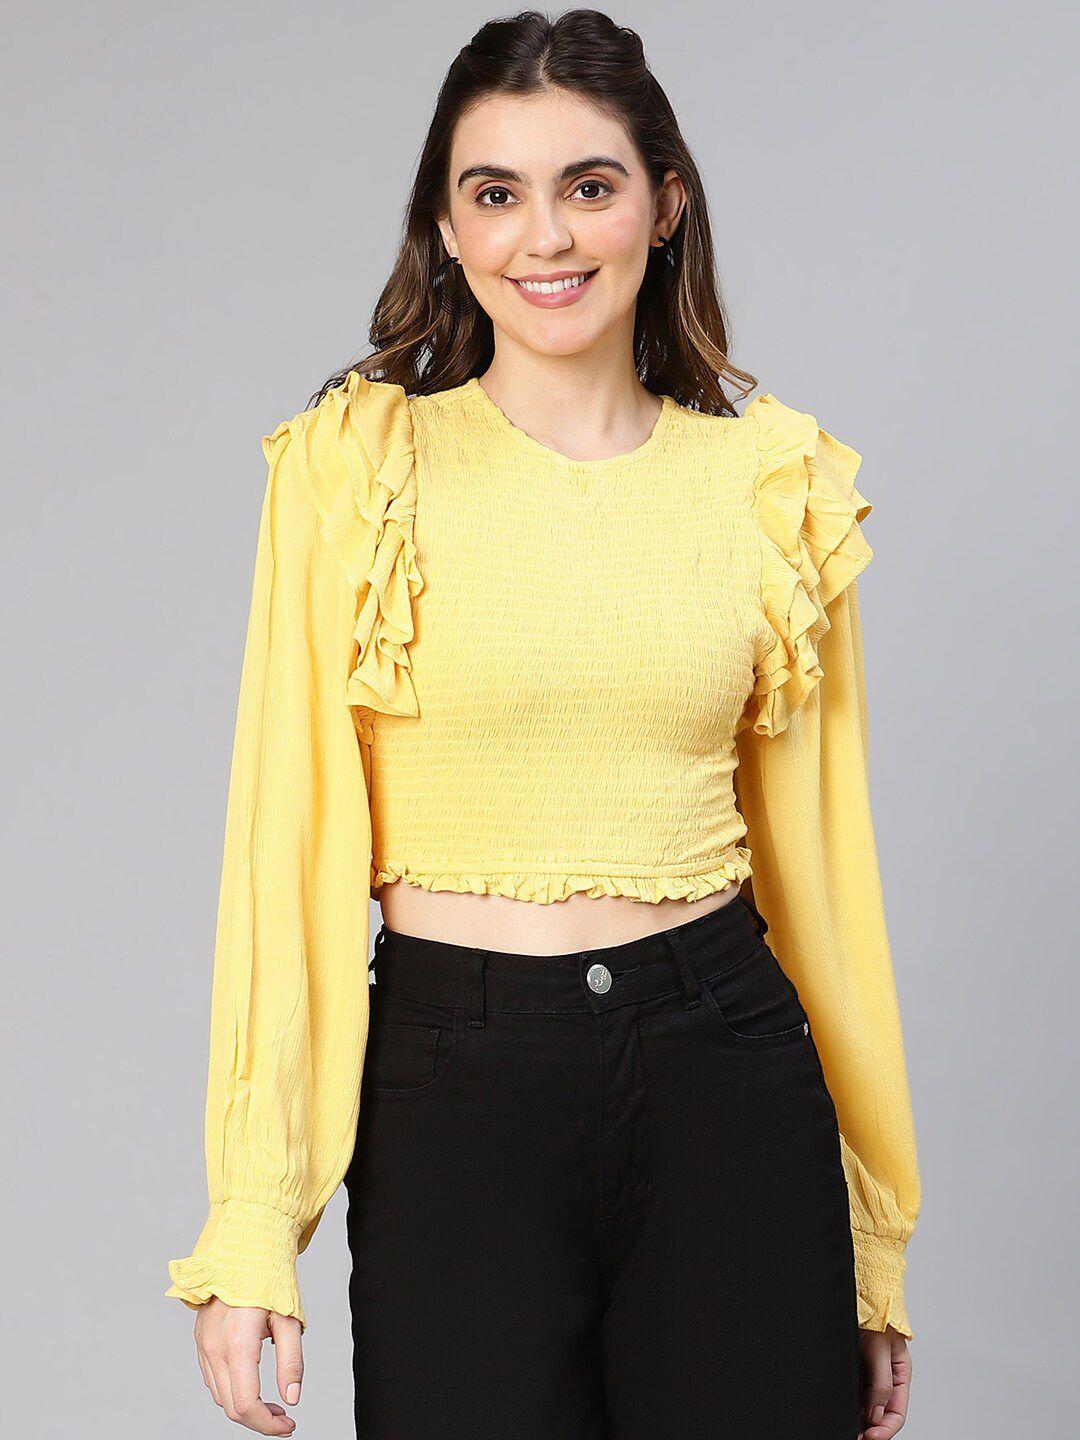 oxolloxo-smocked-&-ruffled-detail-puff-sleeves-crepe-crop-top